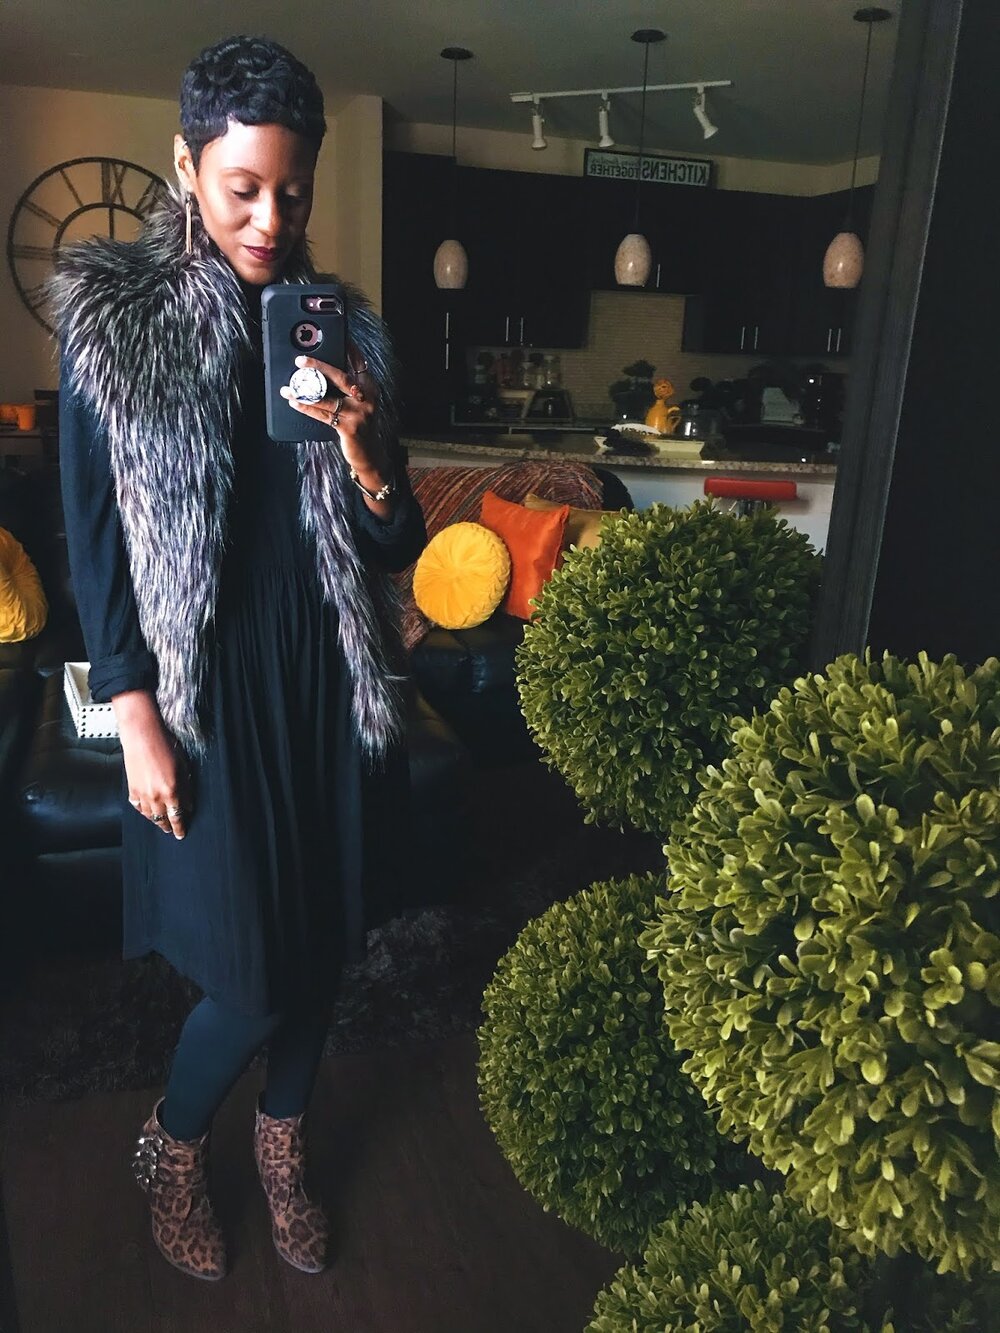 Quick OOTD: Cheetah Print Shoes and Fur Vests That Make You Feel Super Fancy!